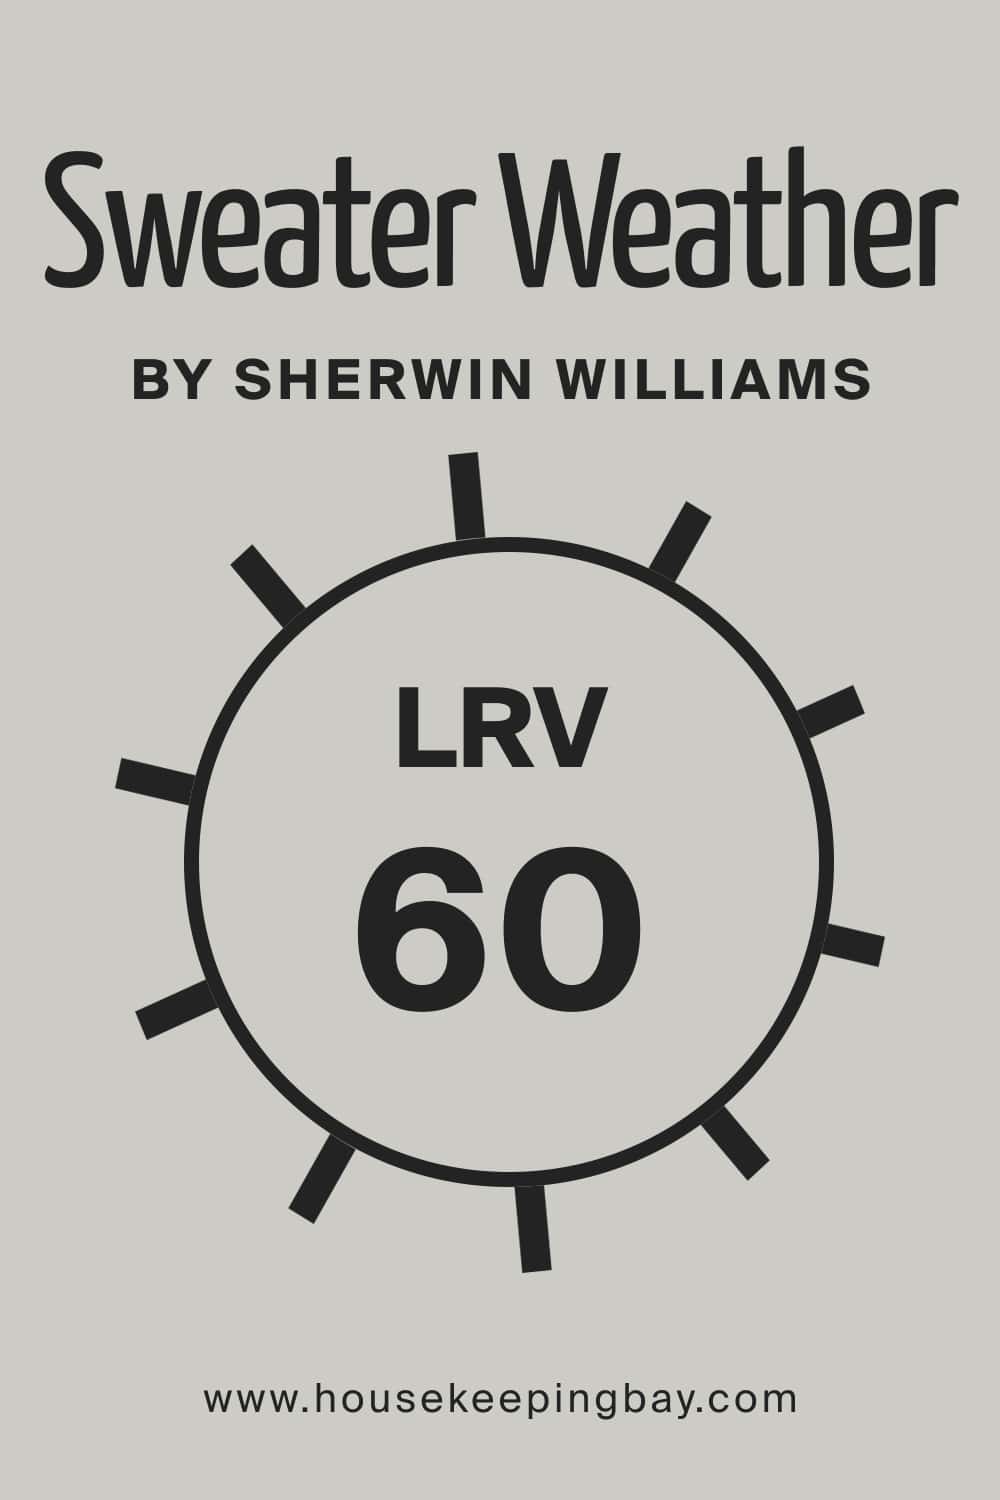 Sweater Weather SW 9548 by Sherwin Williams. LRV 60